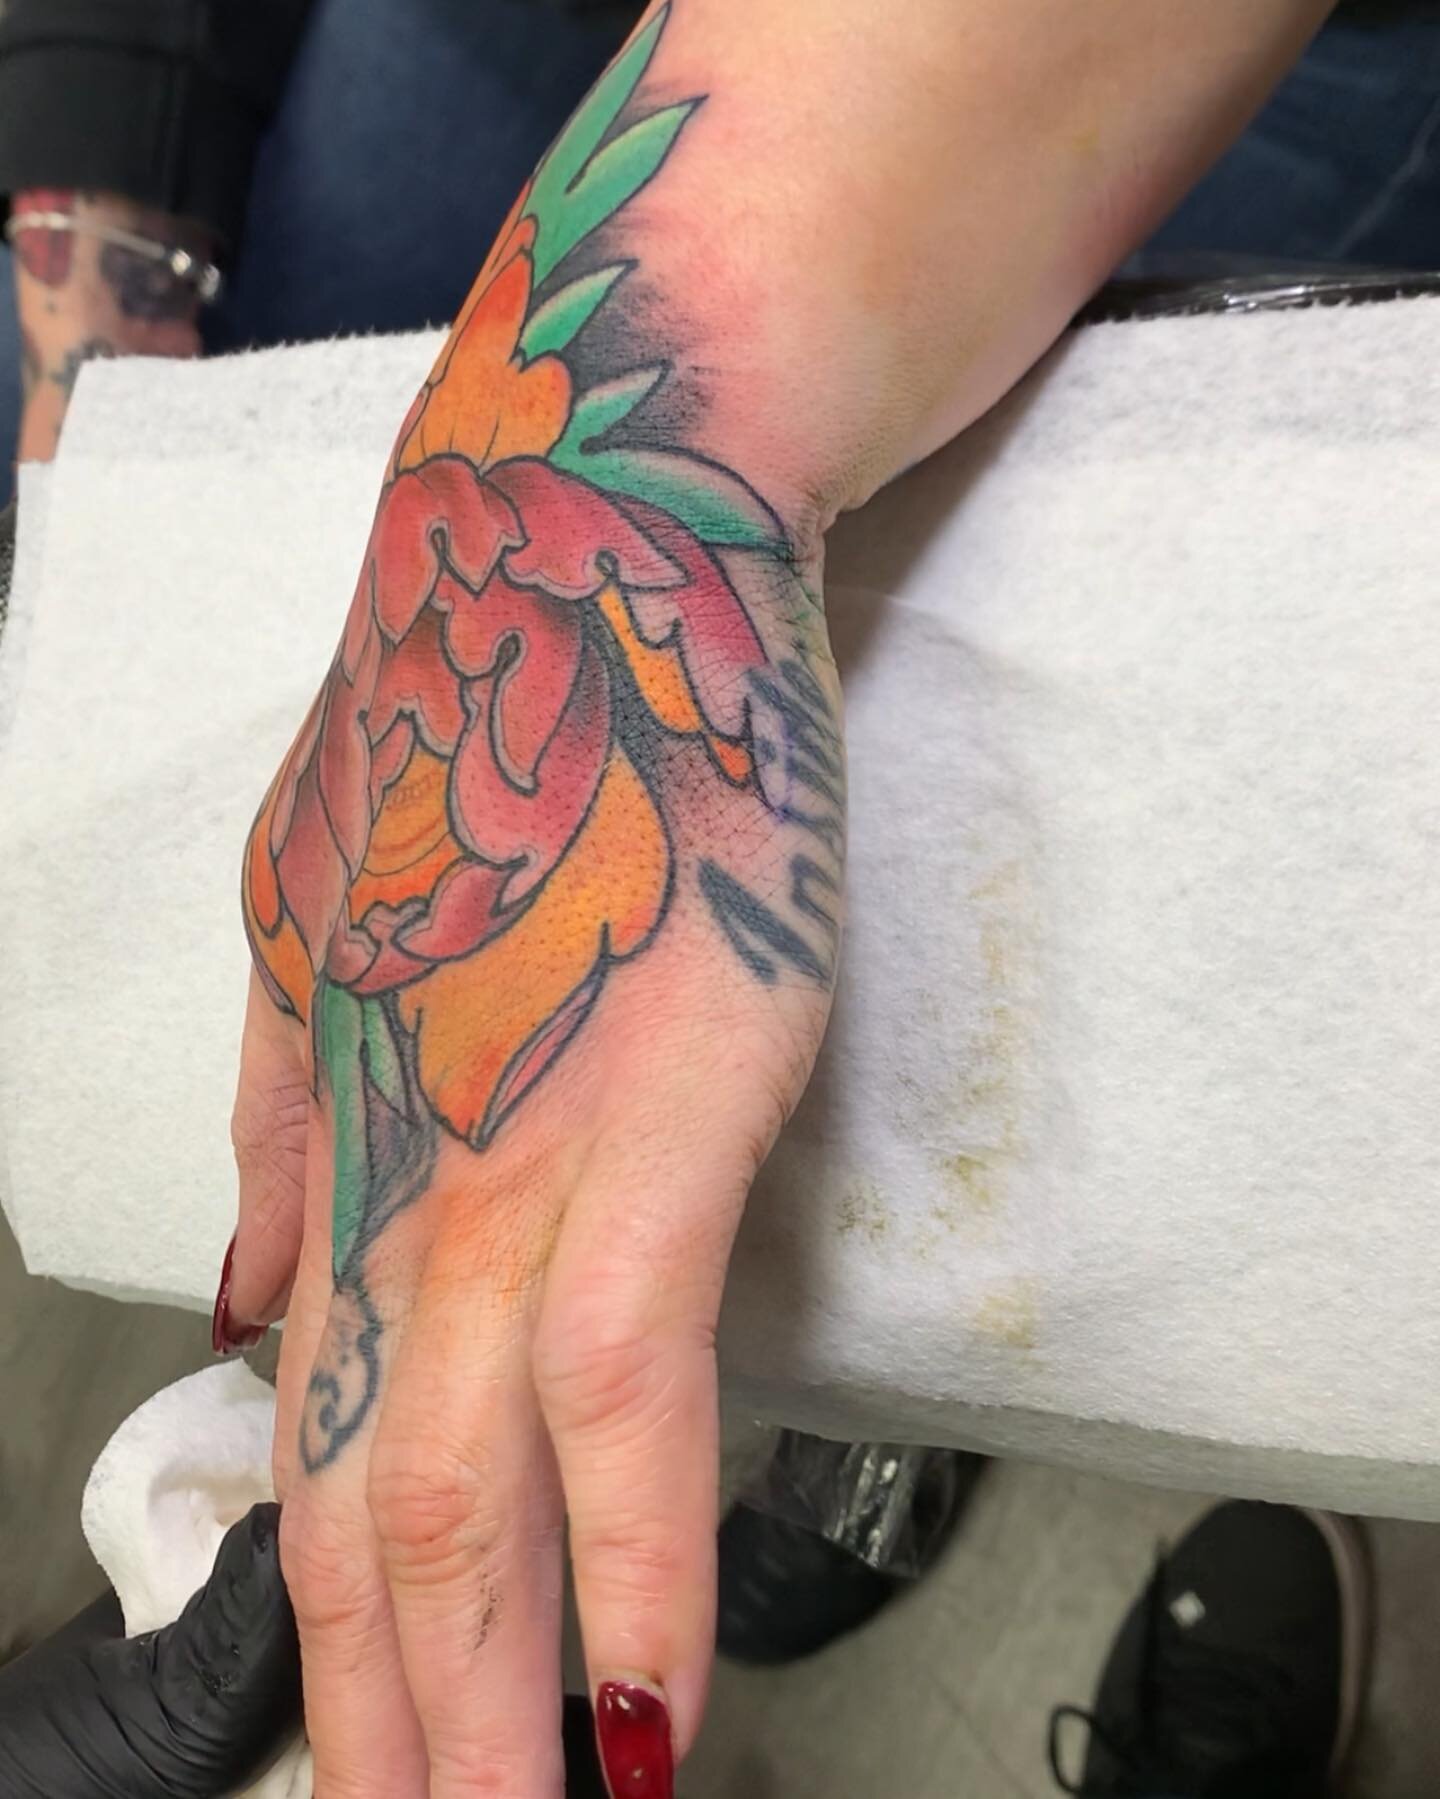 A nice peonies on the hand. Had fun with this one! #massachusetts #westernmasstattoo #Connecticut #connecticuttattoo #southwindsor #angrypenciltattoo #tattoo #tattoos #eternalink #hivecaps #saniderm #helios #dragonsbloodbutter #MAtattoo #CTtattoo #CT